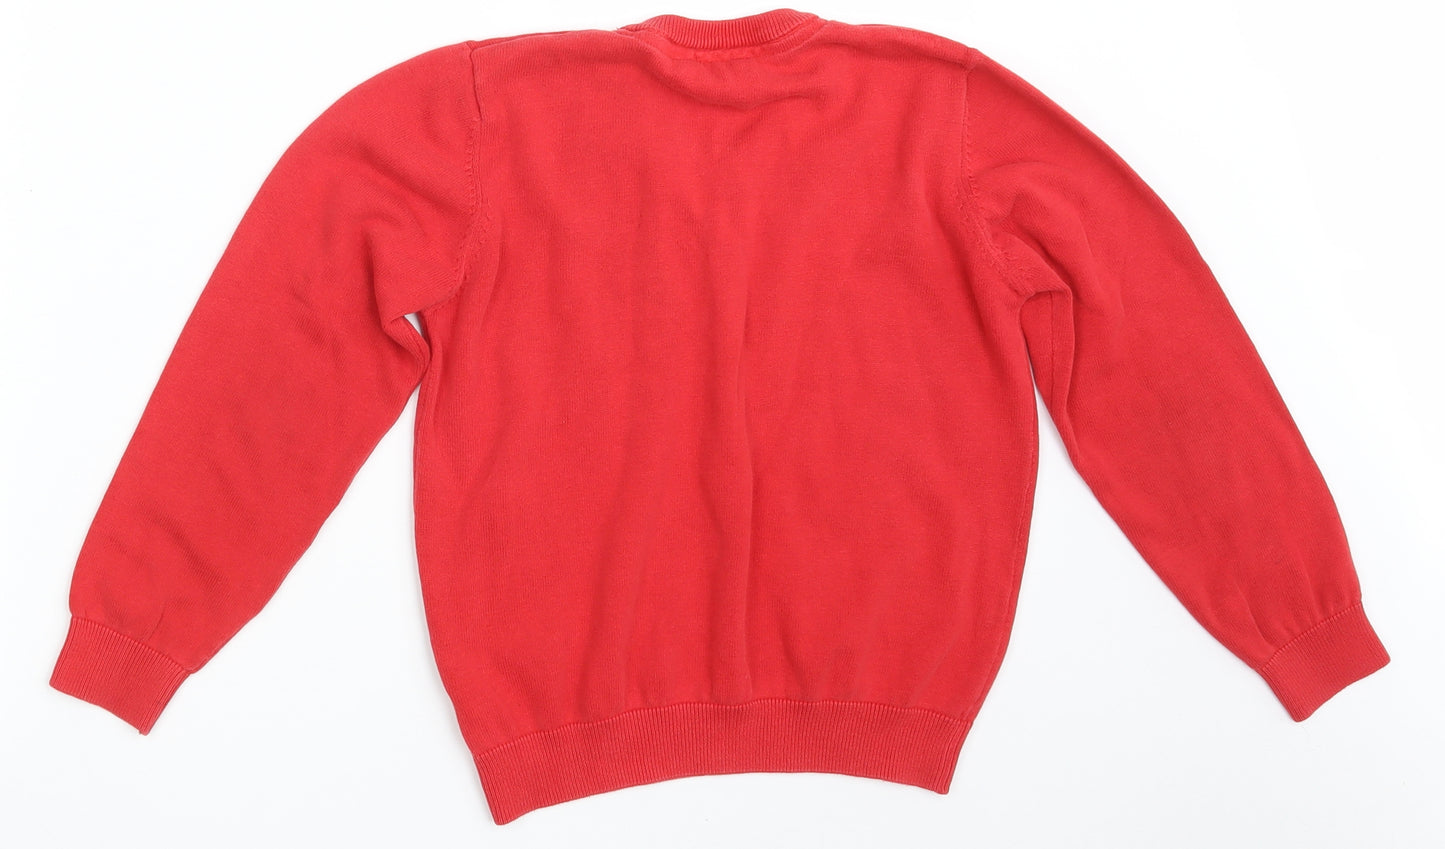 Marks and Spencer Boys Red V-Neck  100% Cotton Pullover Jumper Size 8-9 Years   - School wear